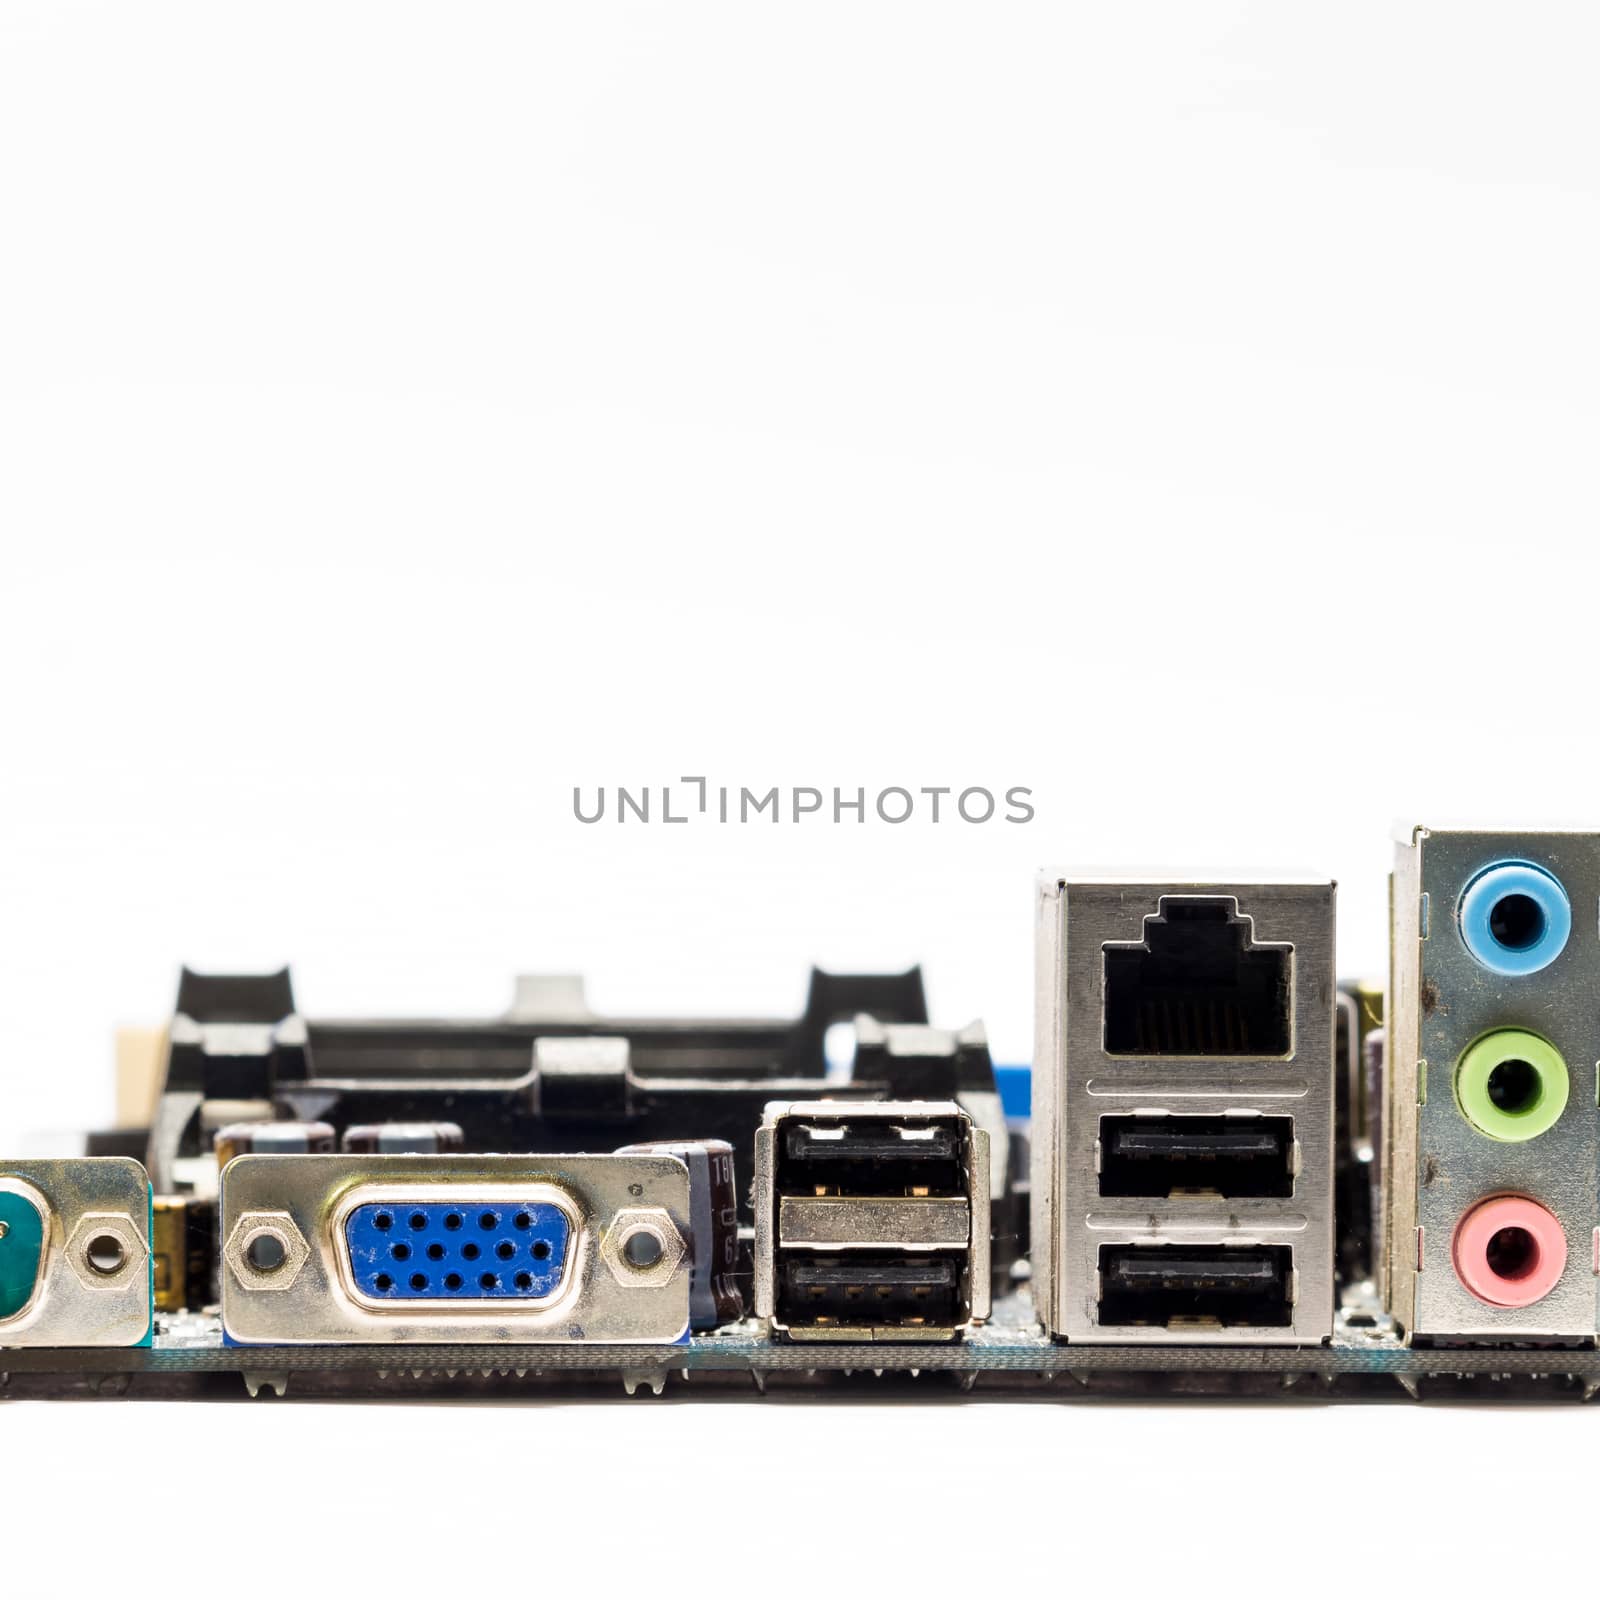 Connector of computer motherboard, isolated on white background.